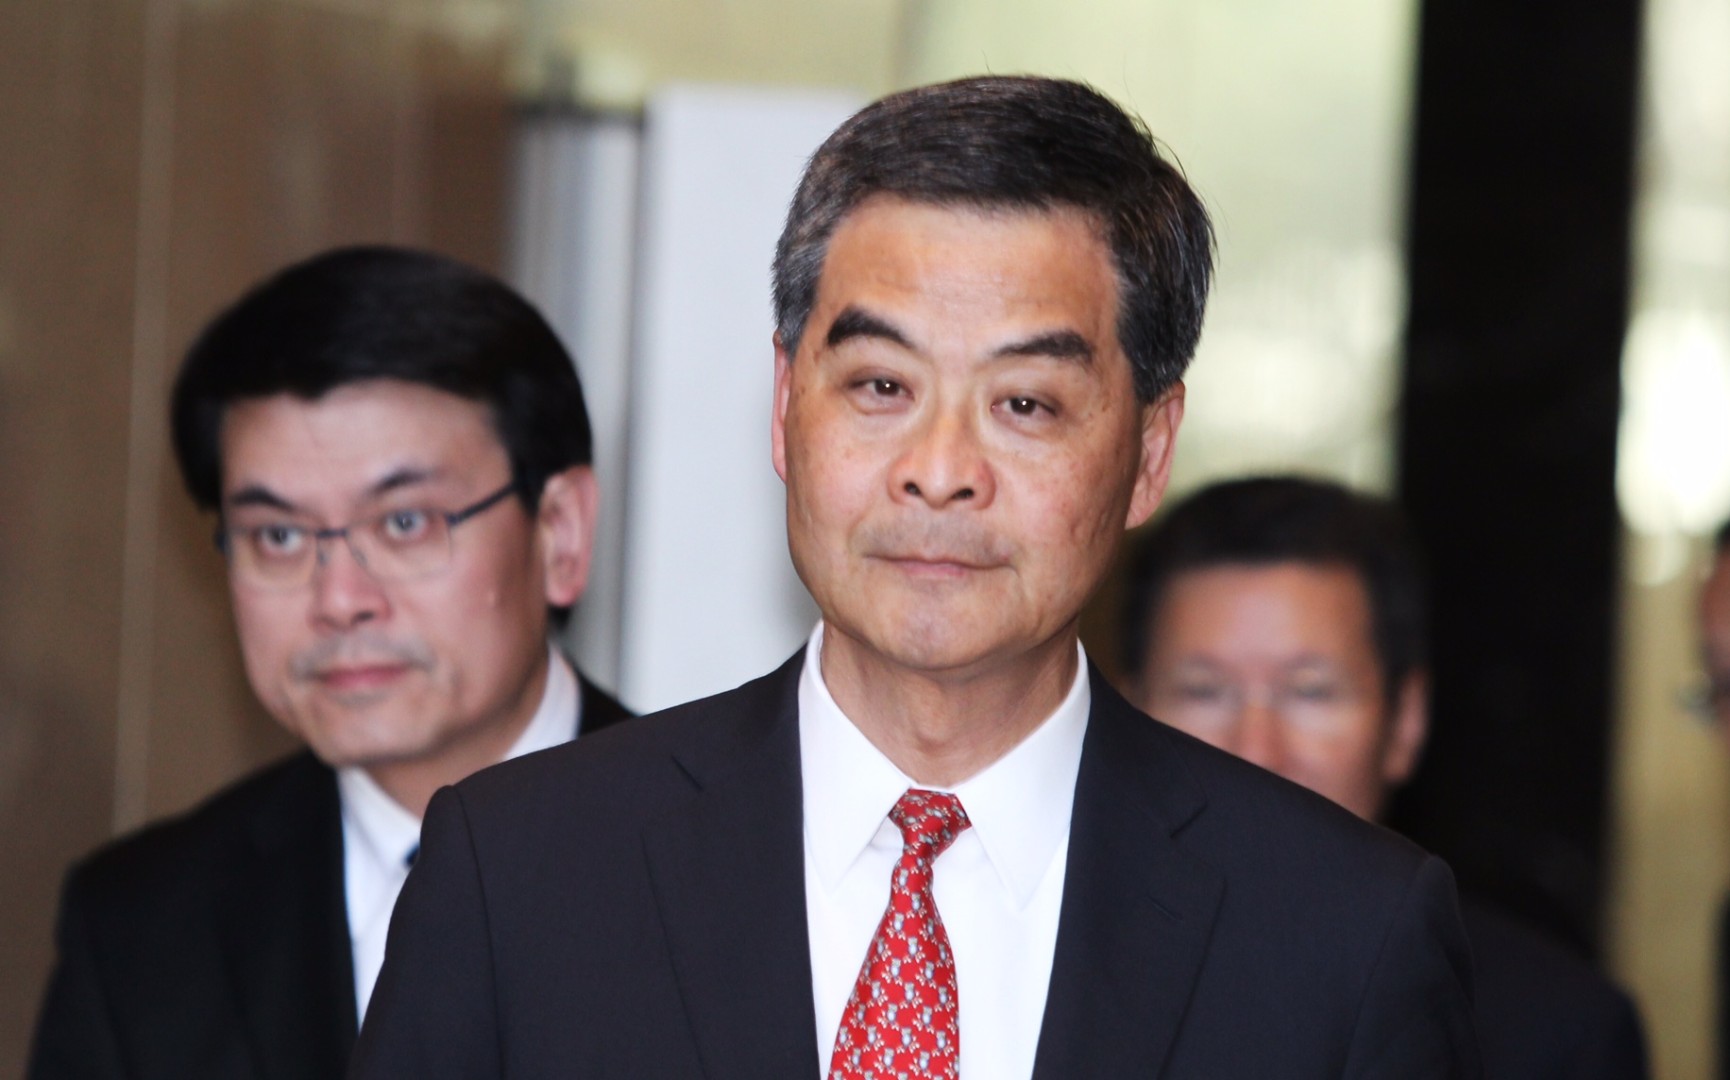 Candid Beach Nudes In Spain - CY Leung will state his 'determination' to implement ...